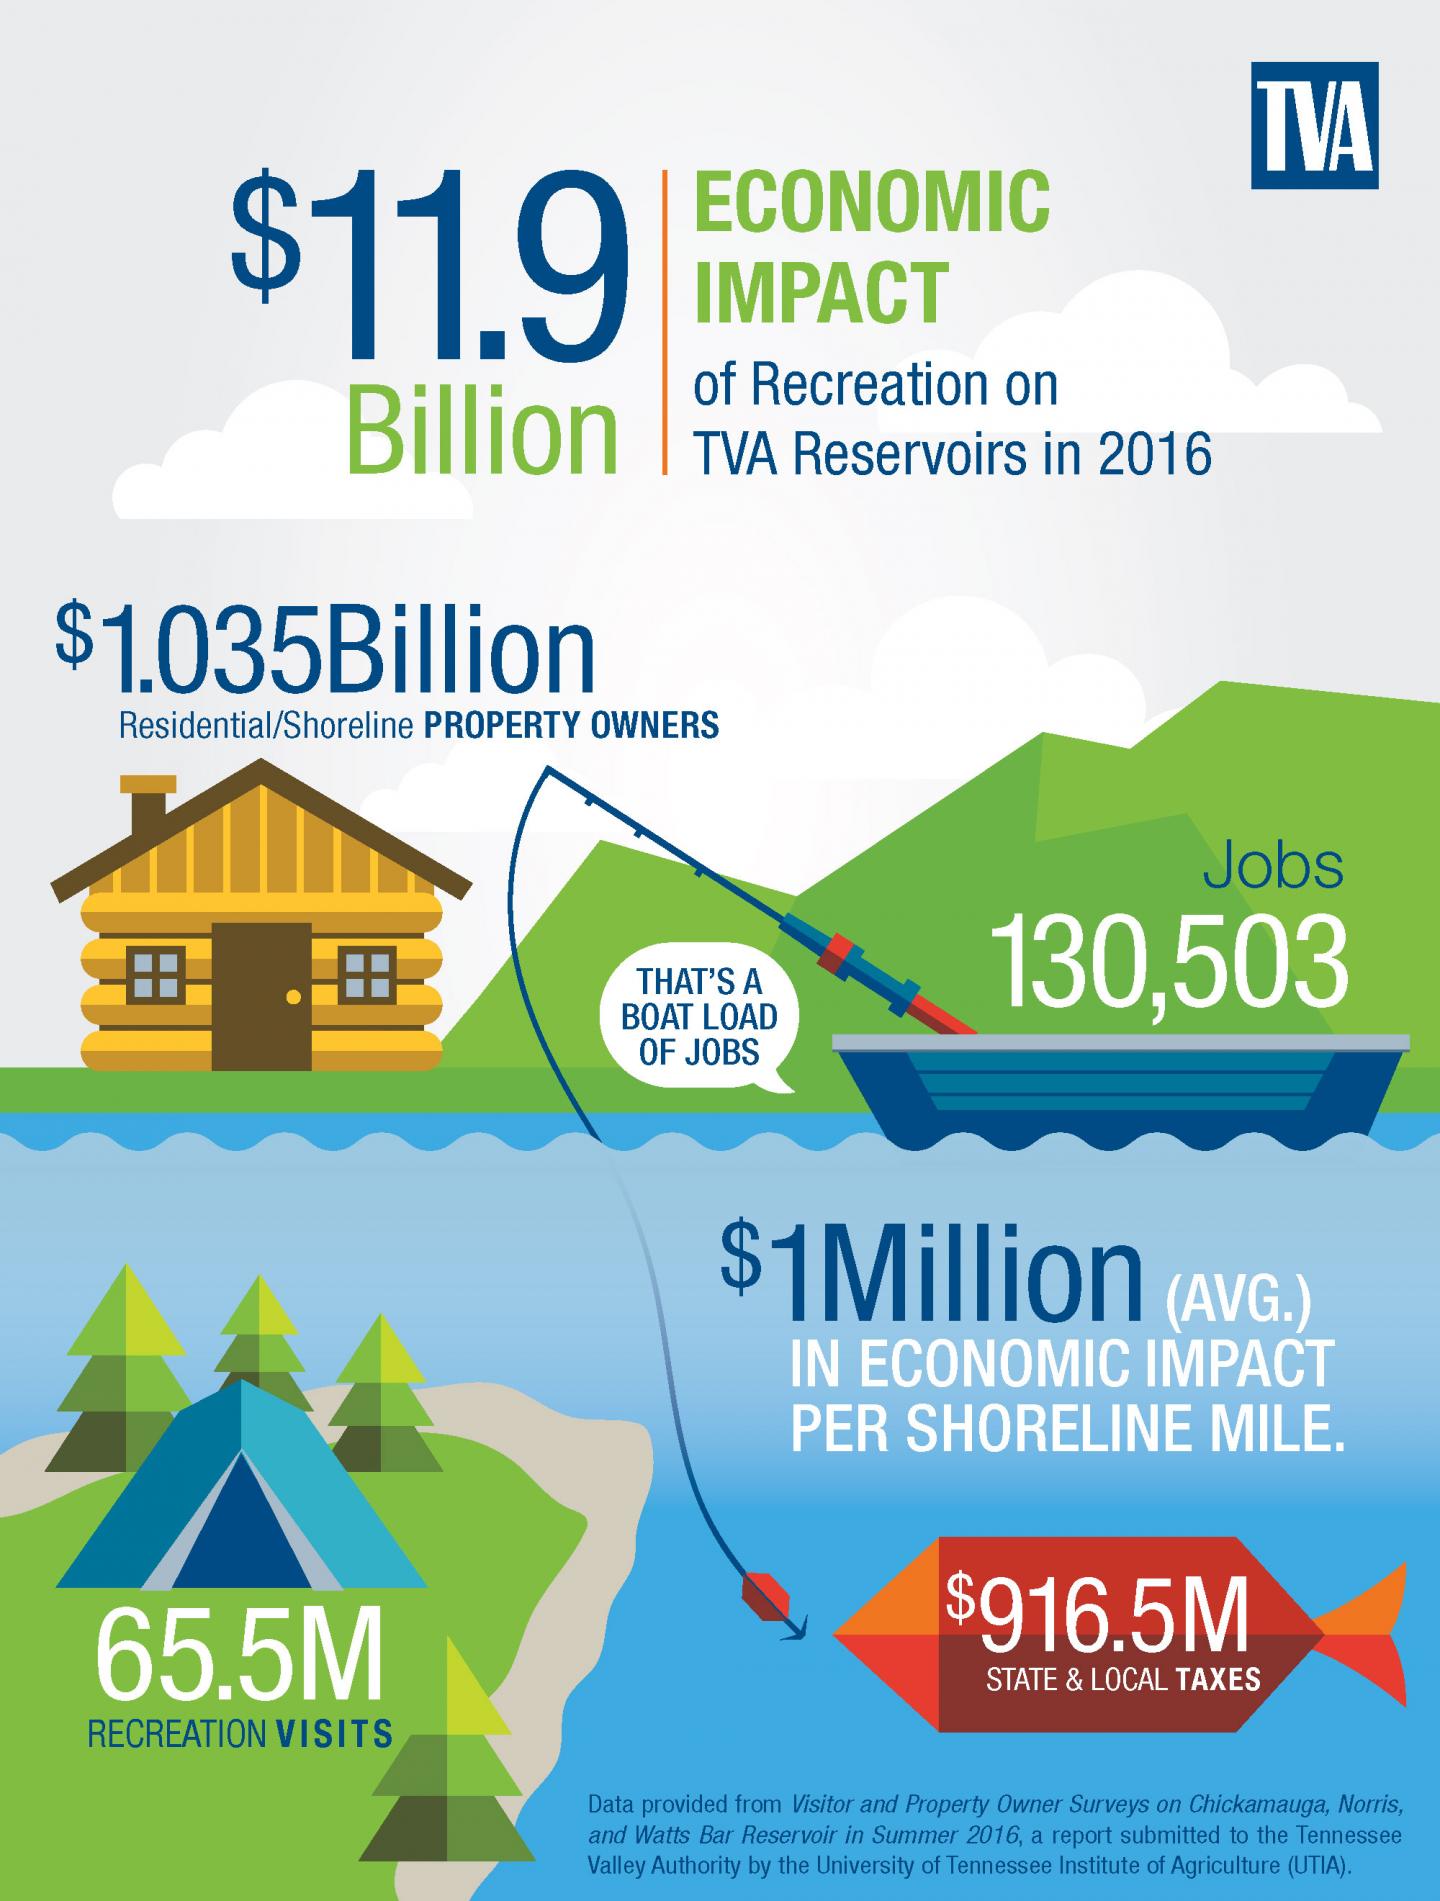 Schematic of Economic Impact of Recreation on TVA Reservoirs, 2016